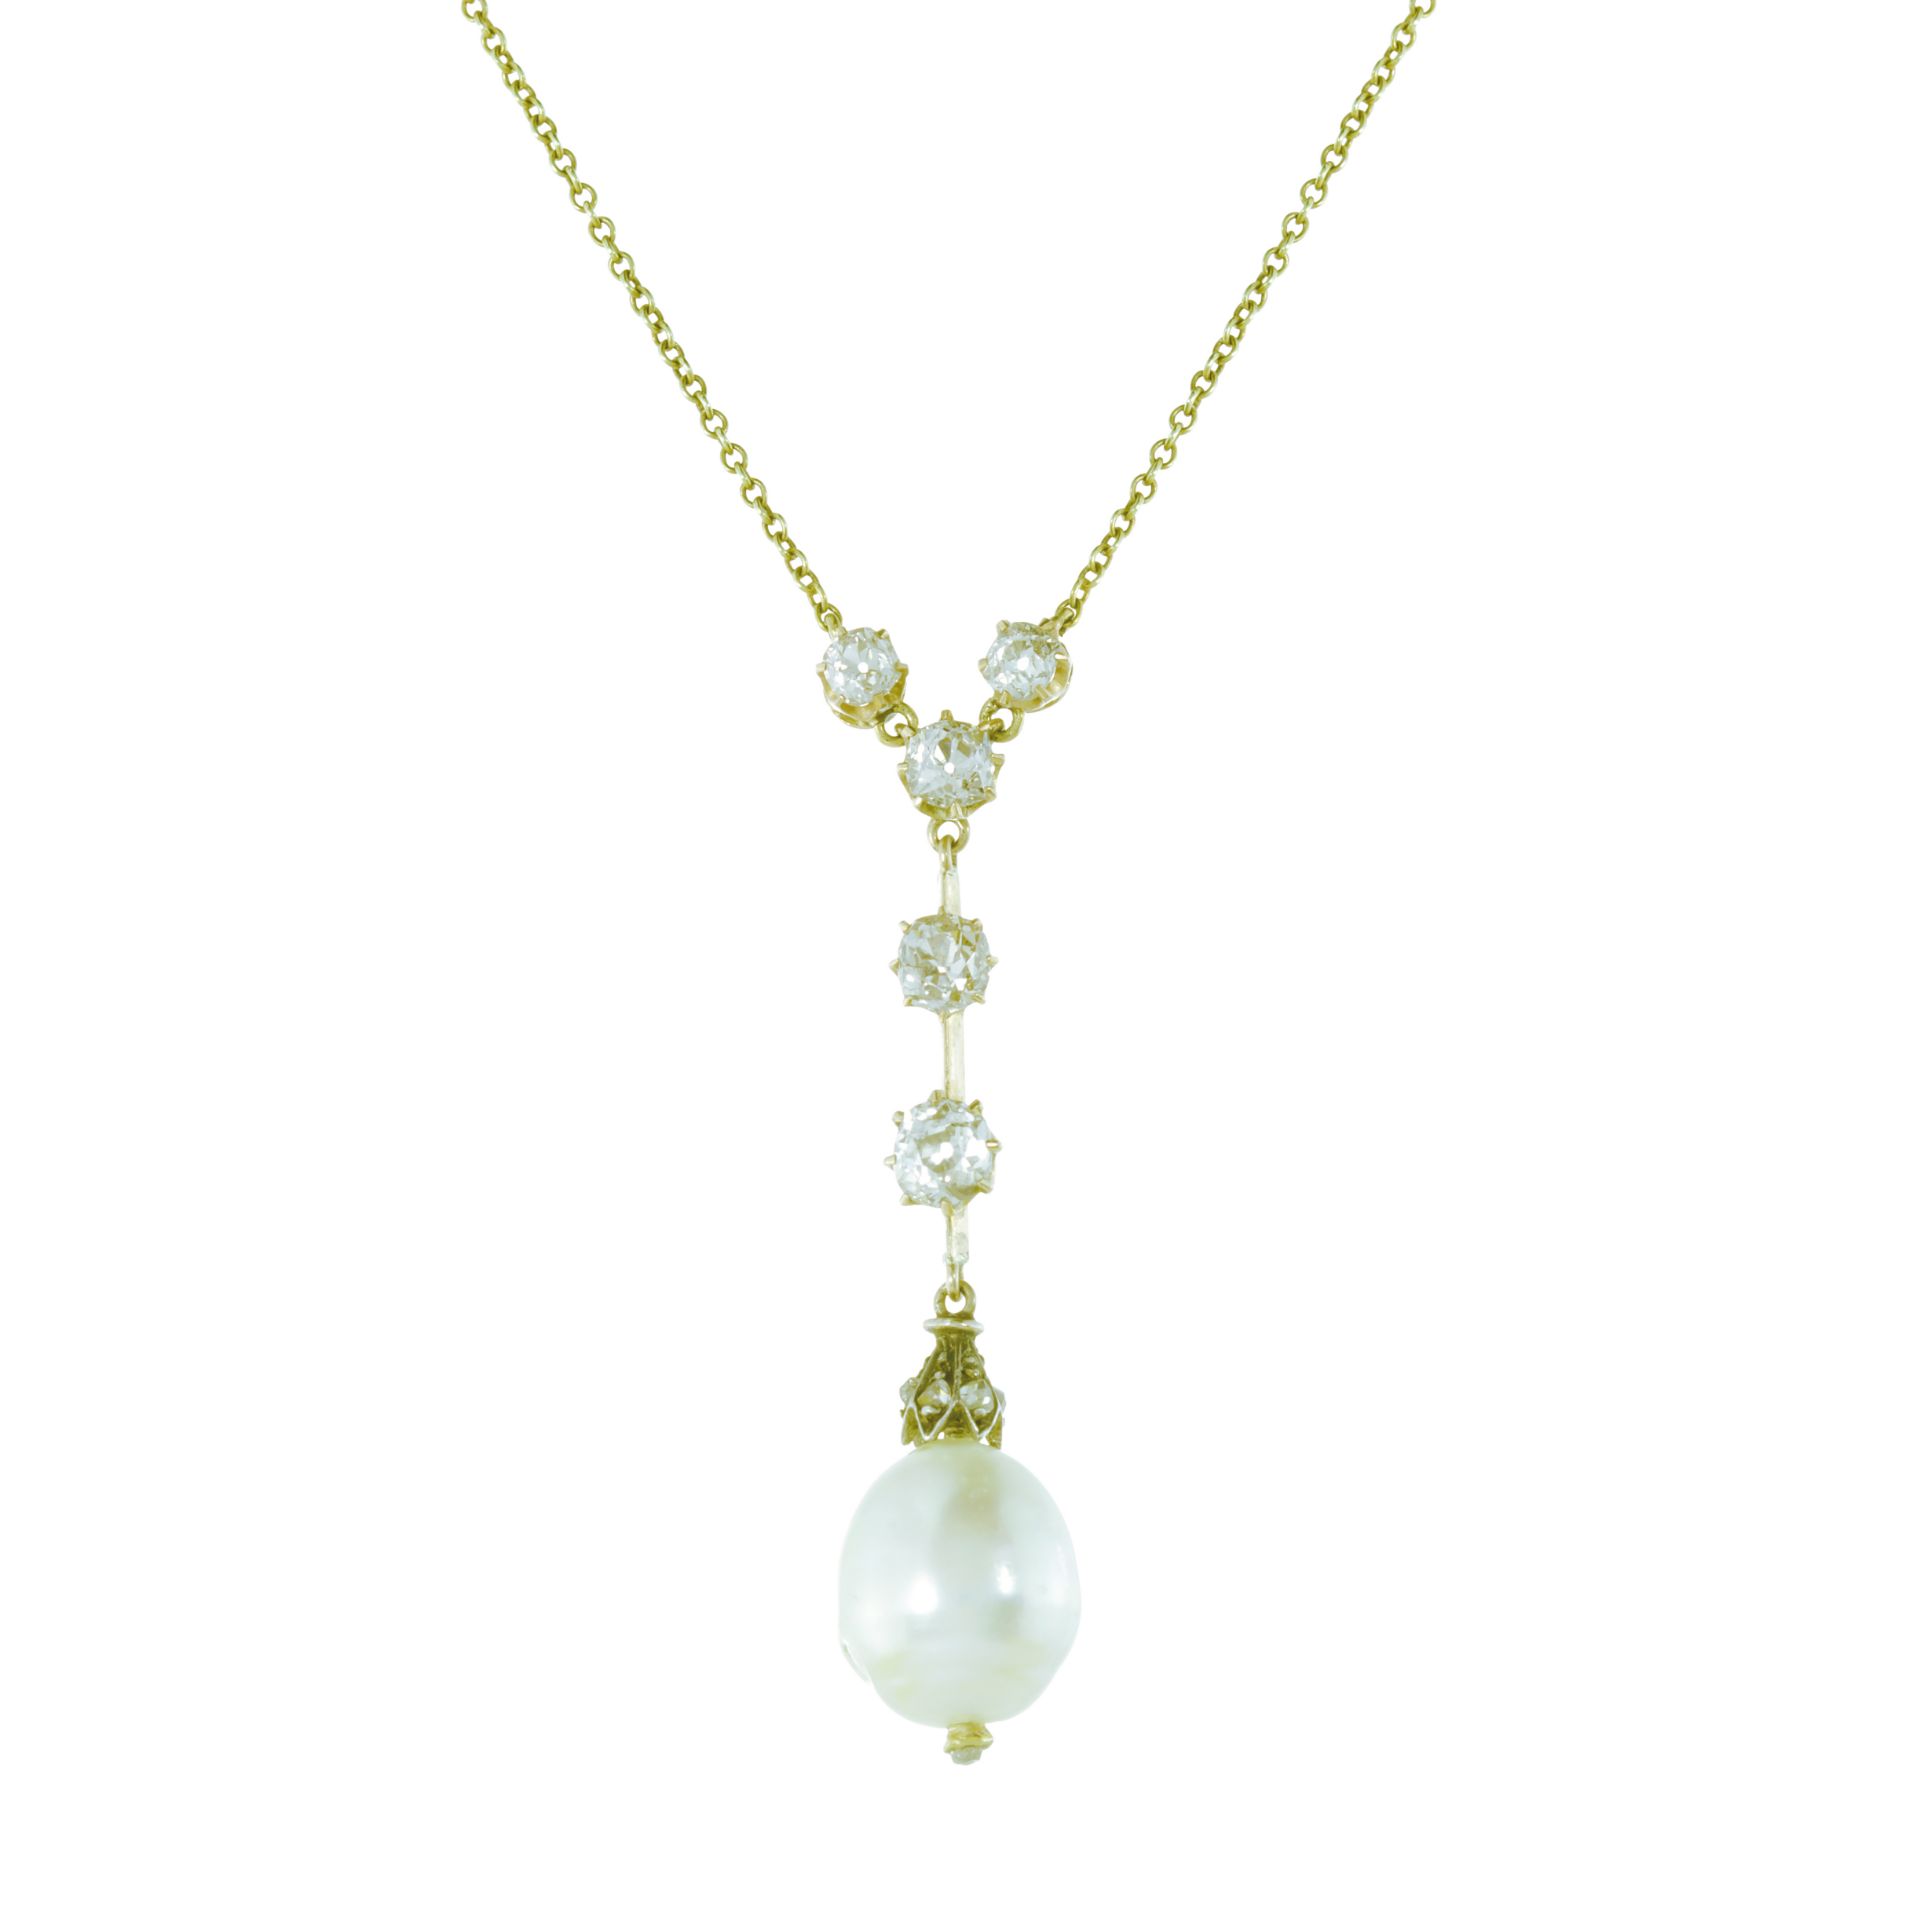 AN ANTIQUE PEARL AND DIAMOND NECKLACE in high carat yellow gold, set with a pearl of 11.7mm